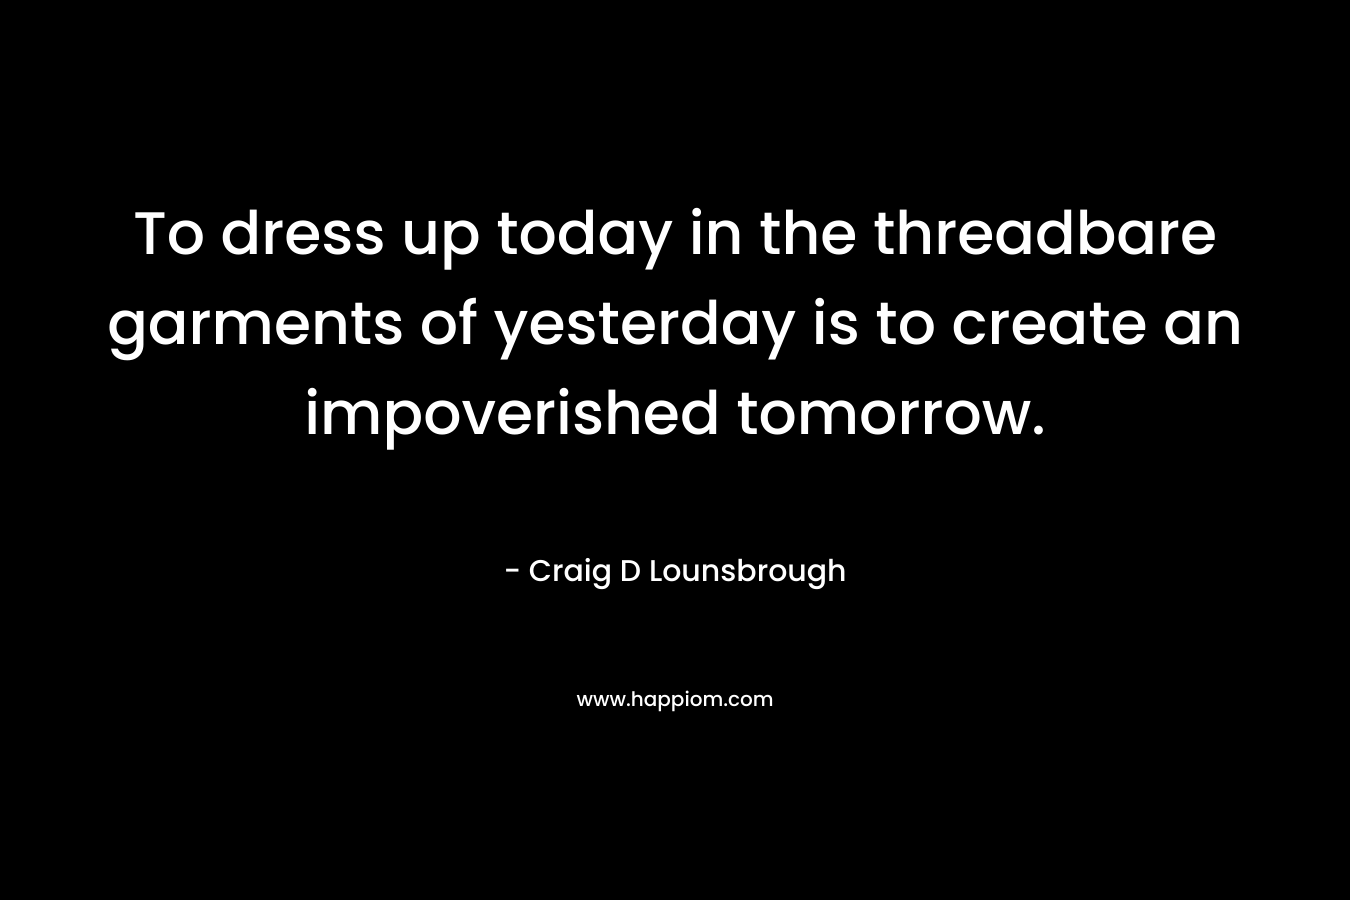 To dress up today in the threadbare garments of yesterday is to create an impoverished tomorrow.